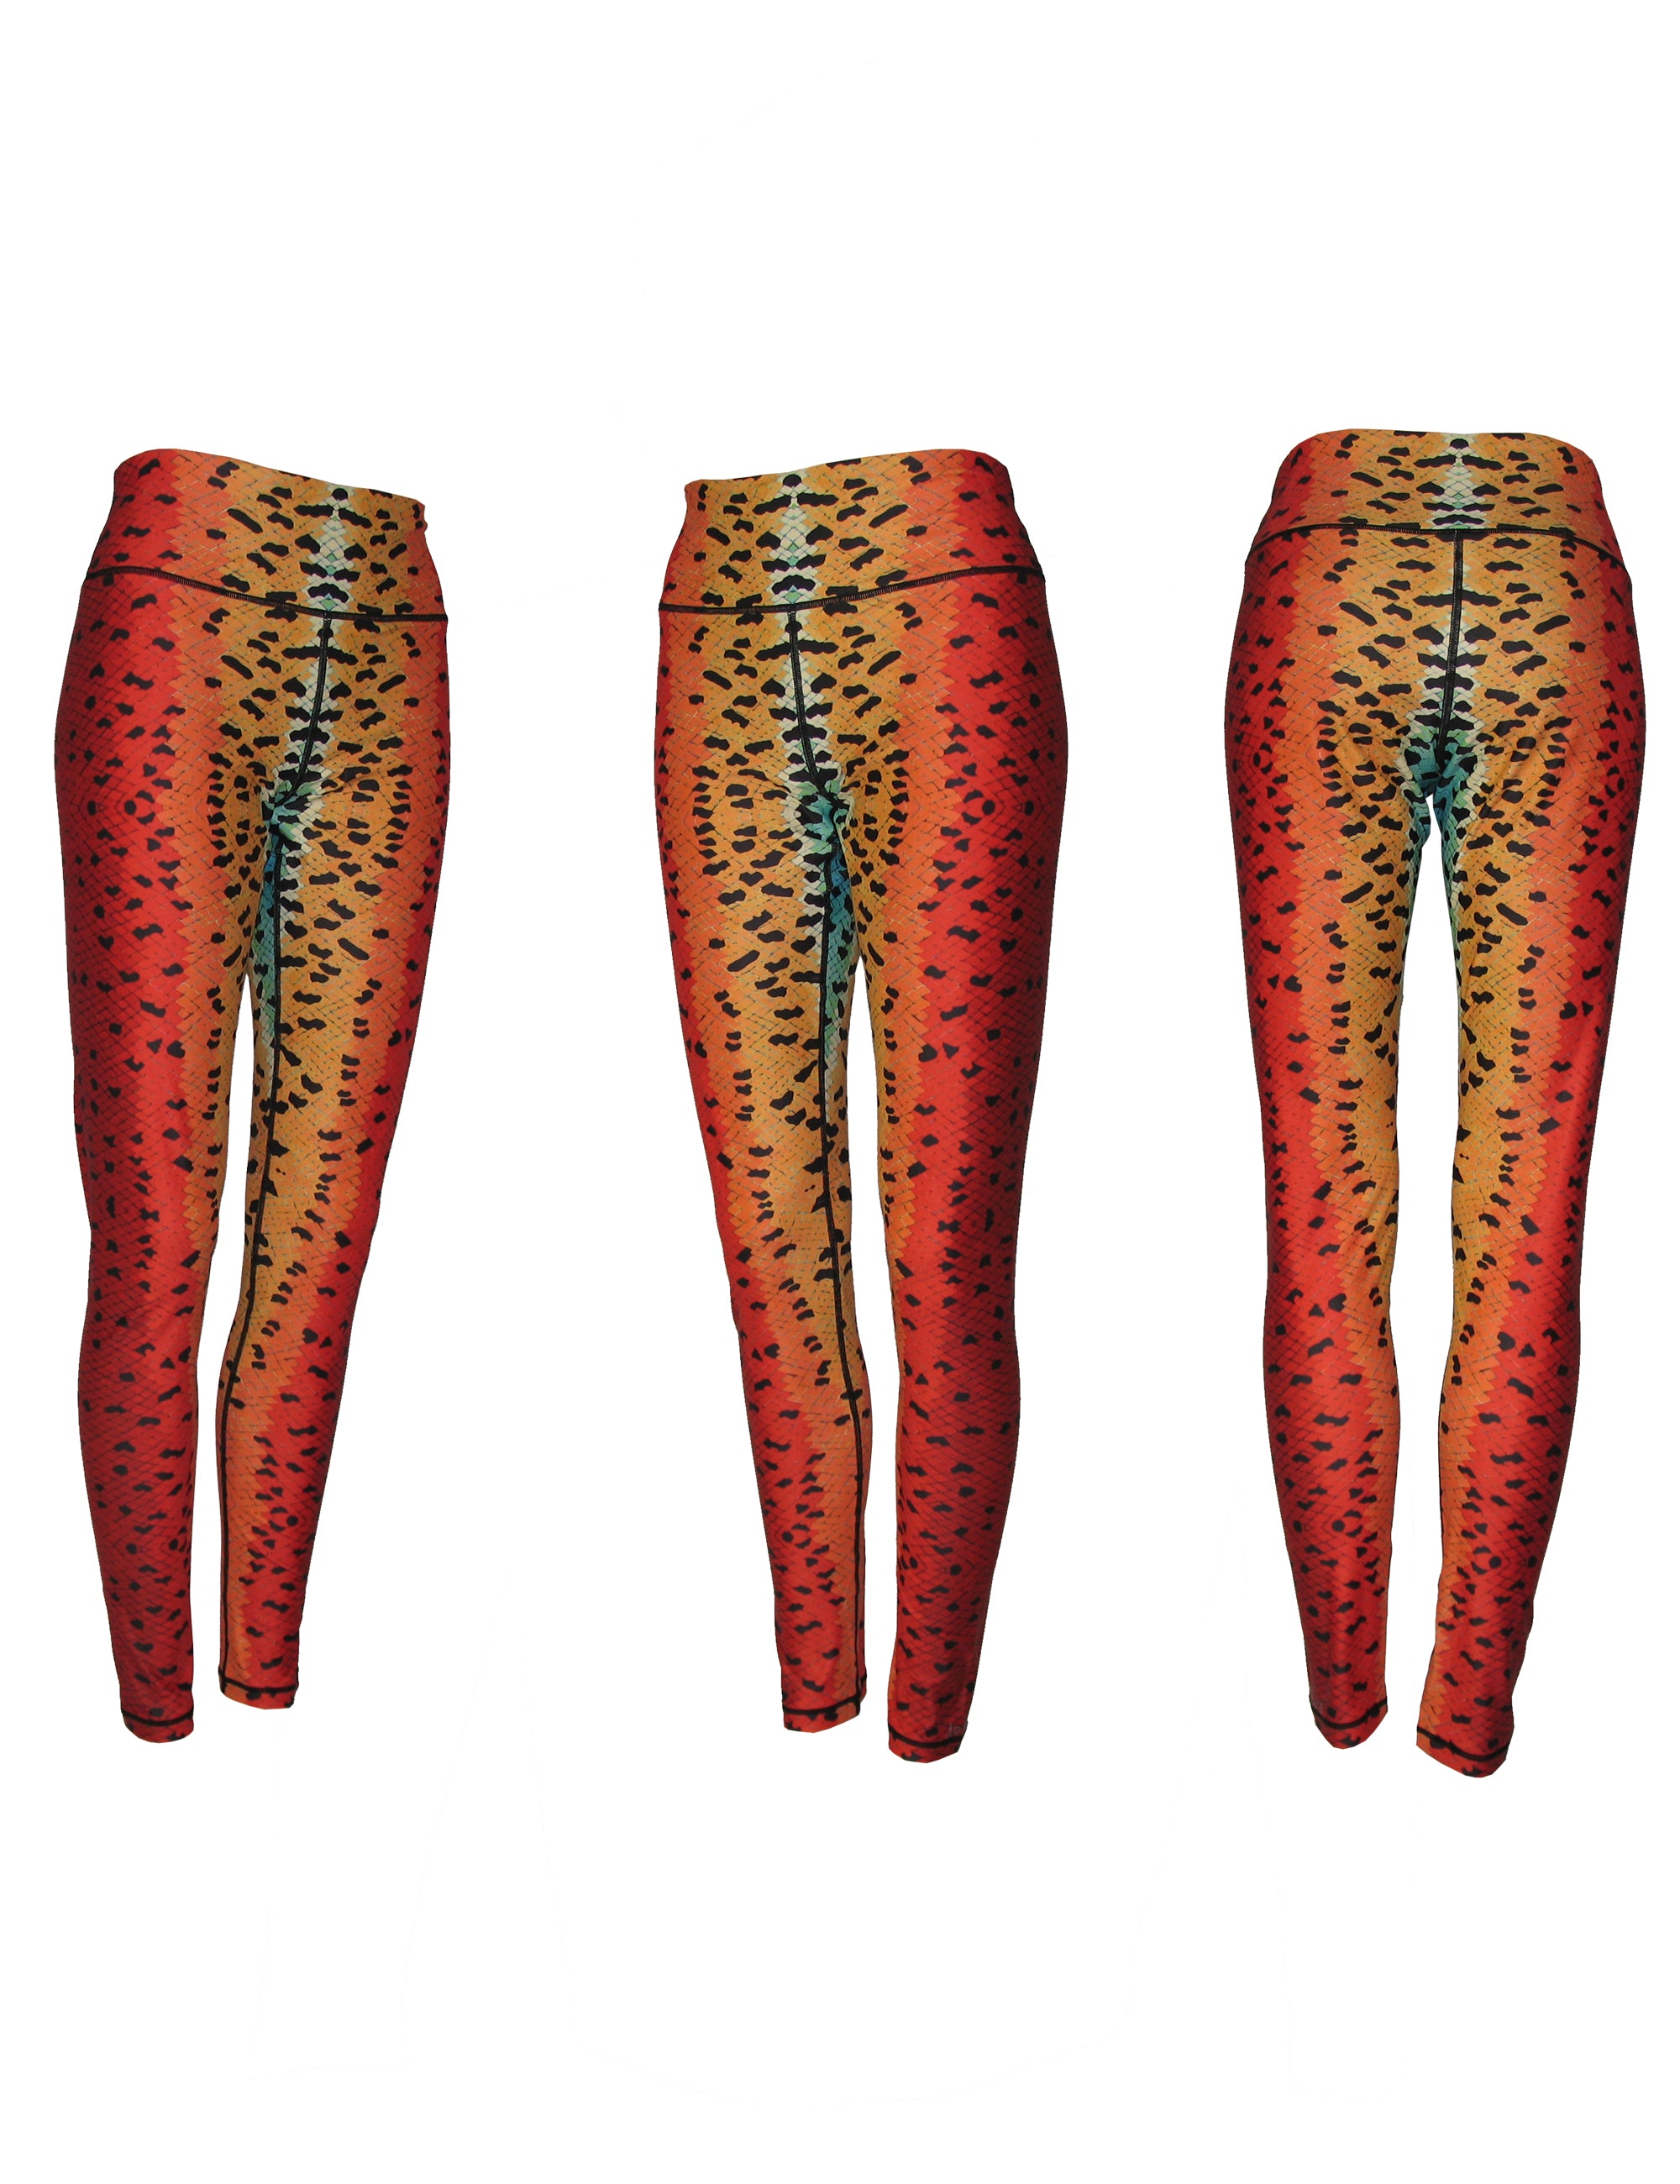 Rainbow#2 Trout All Sport Leggings  Women's Fly Fishing Clothing - Cognito  Brands, Inc.